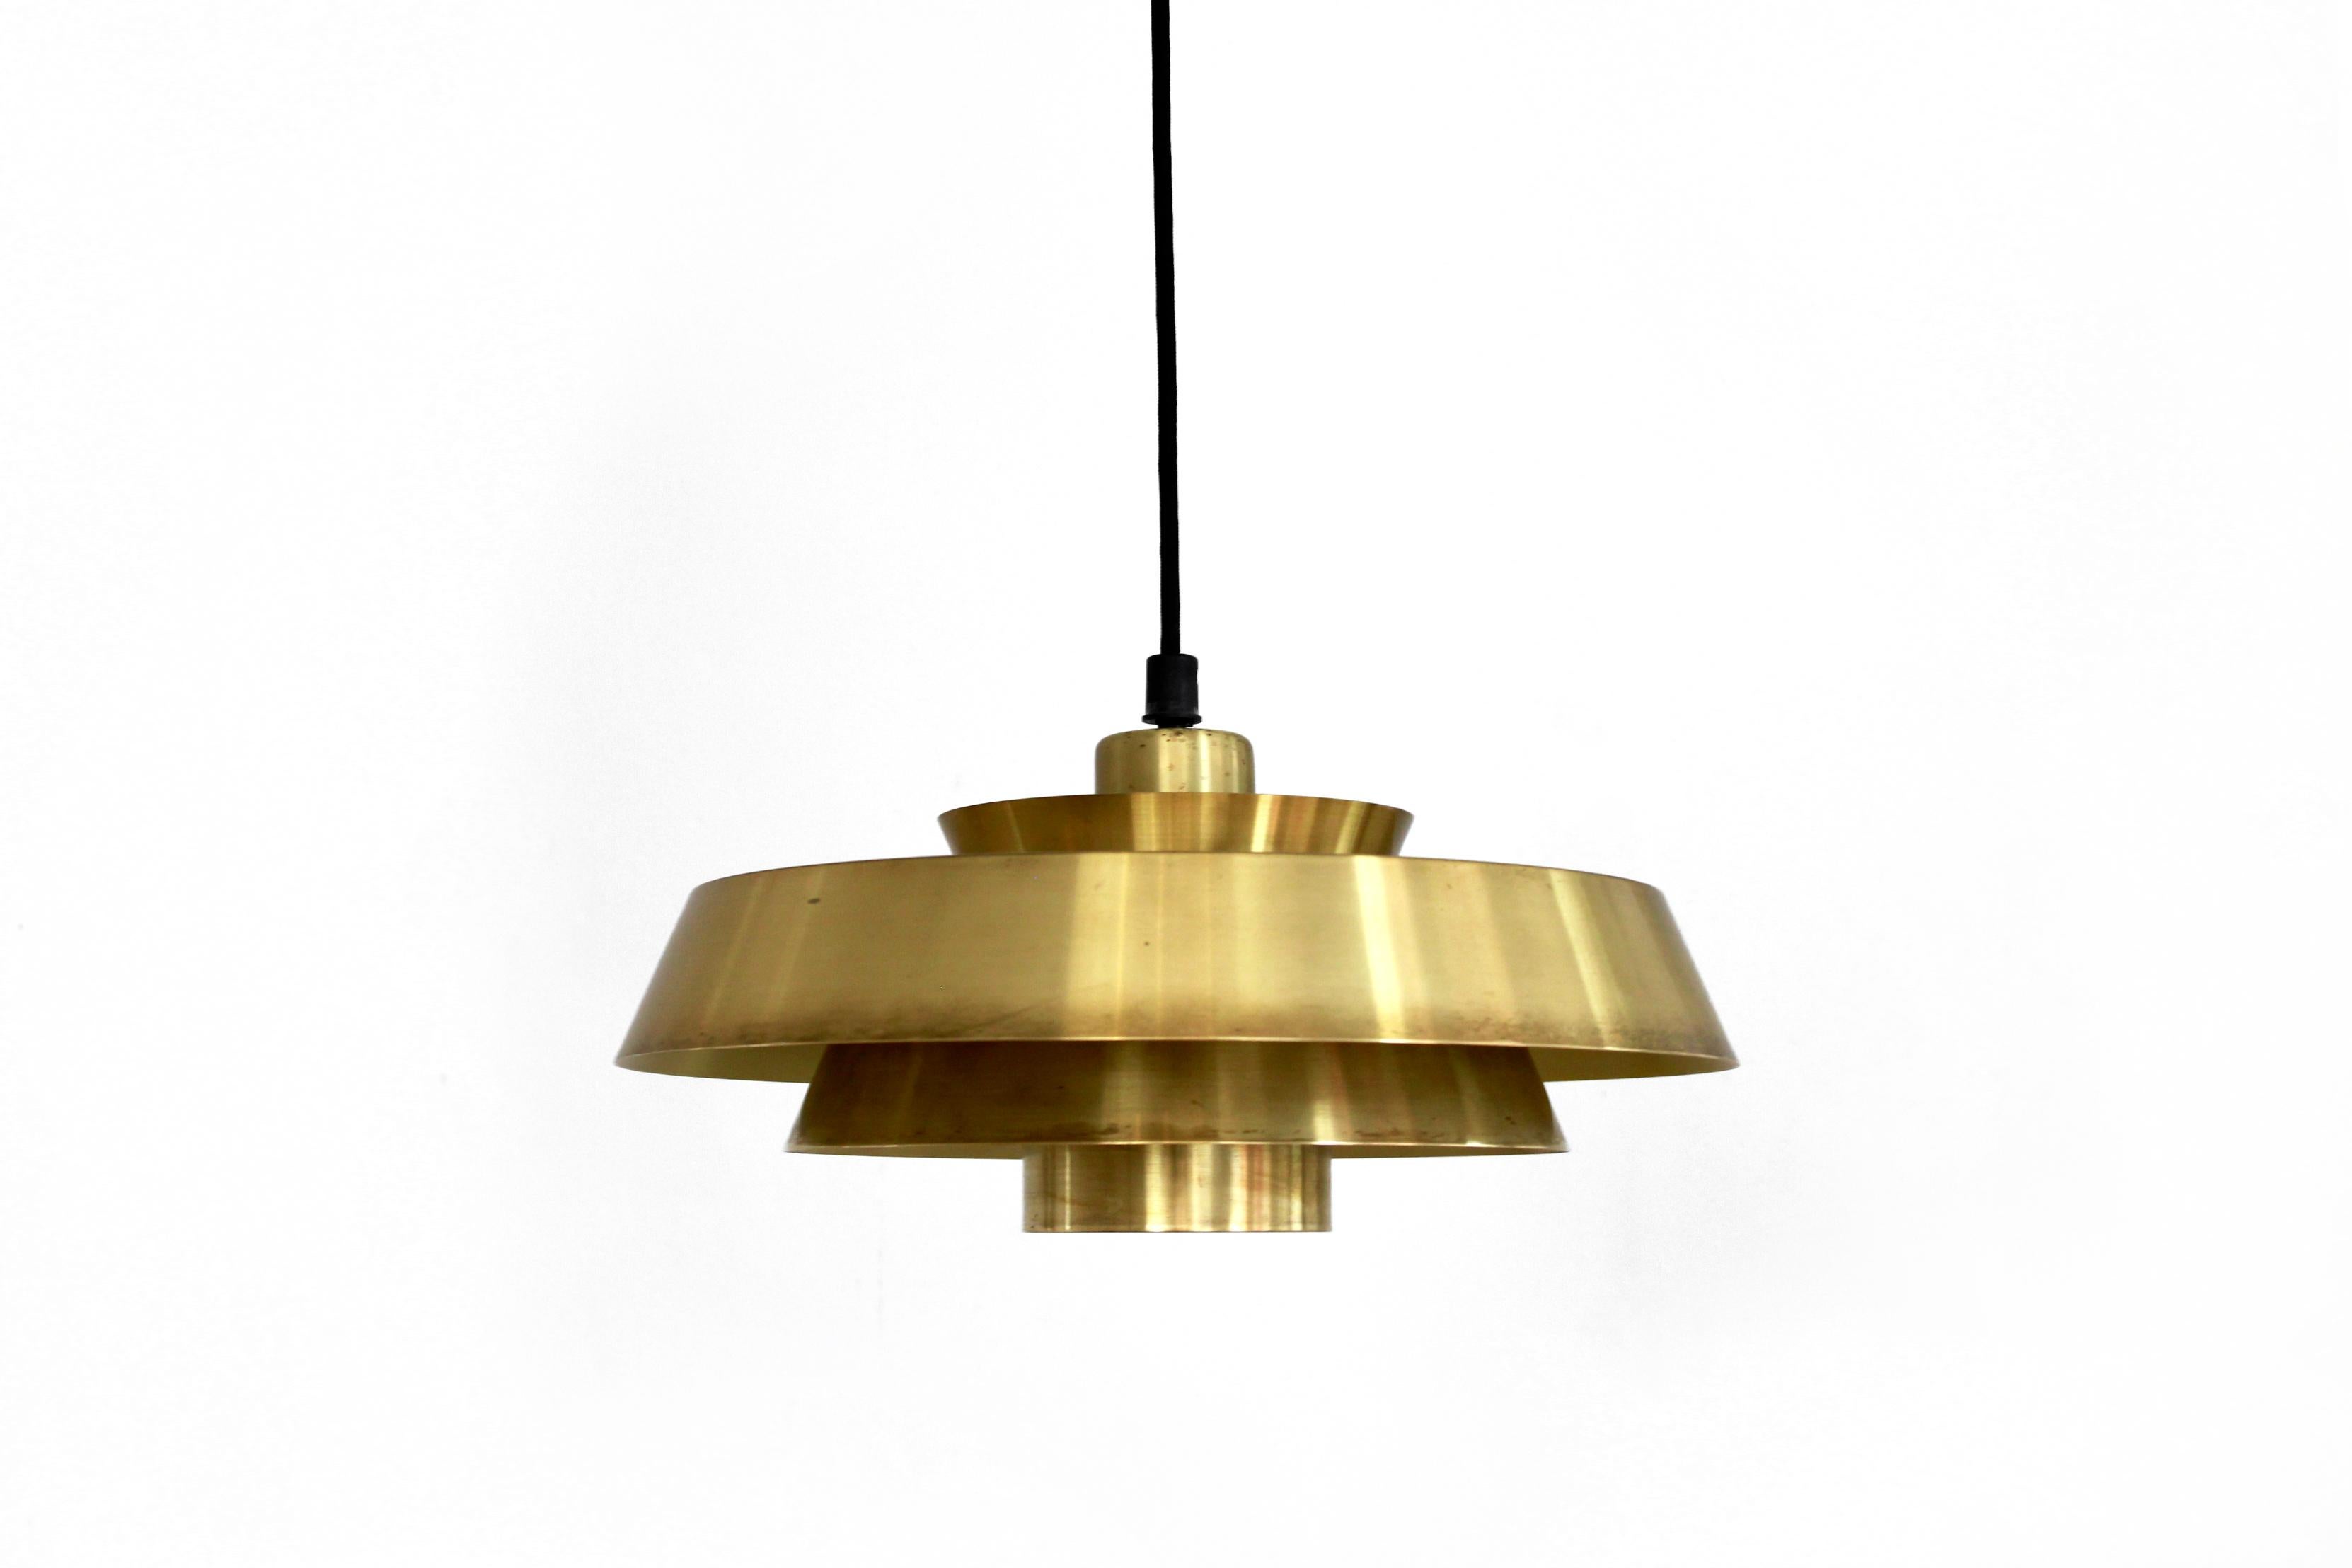 Vintage timeless Jo Hammerborg hanging lamp with model name 'Nova'. The lamp is made of solid brass, which makes this lamp of a very high quality. Even if this lamp is off, it is a beautiful eye-catcher for any interior. The diameter of this lamp is